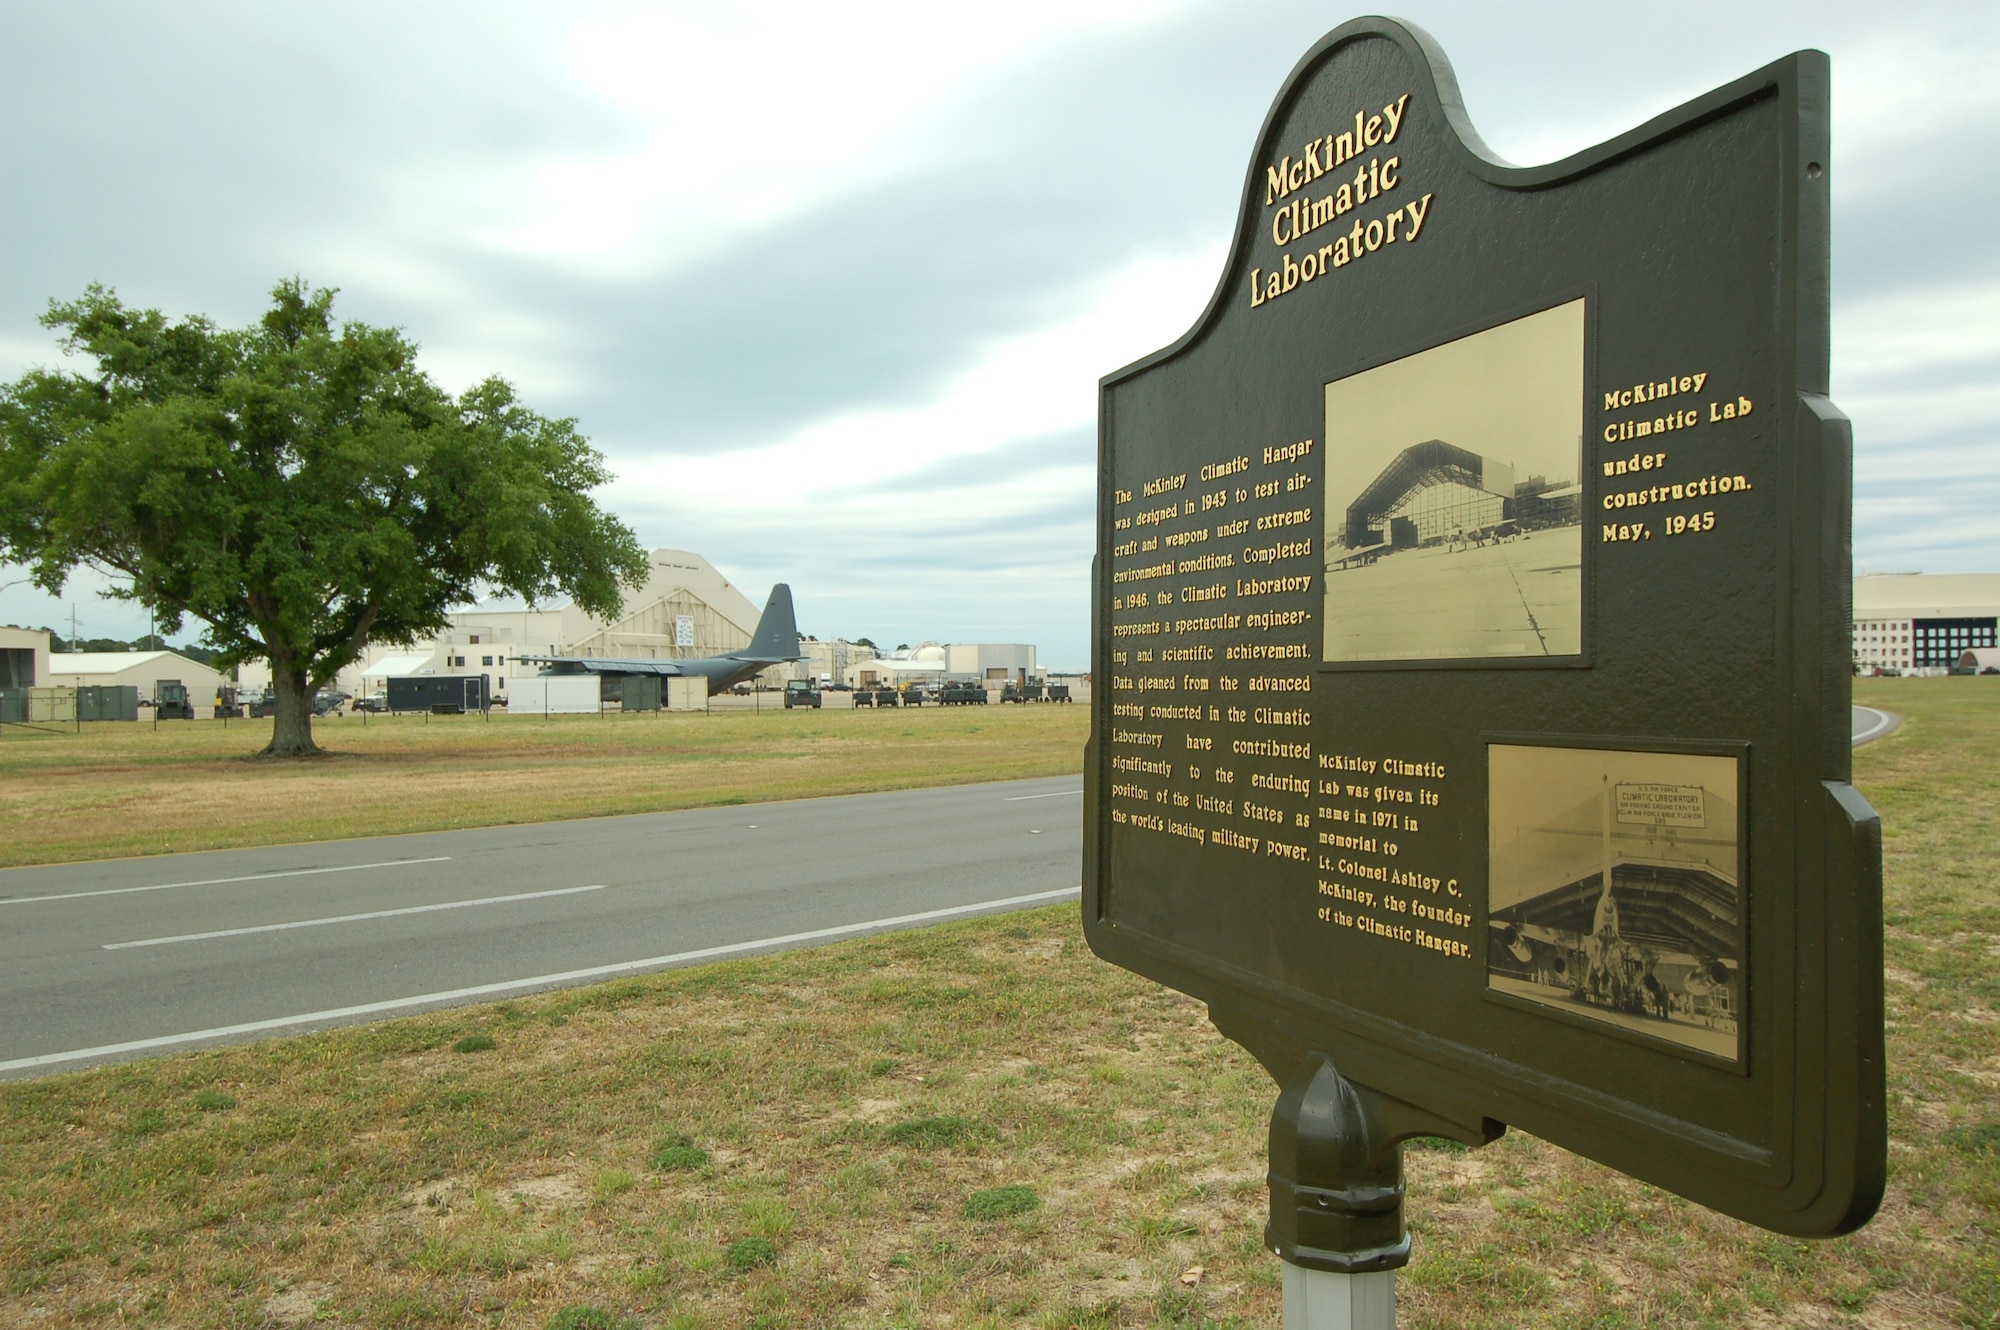 EGLIN AIR FORCE BASE, Fla. -- The McKinley Climatic Lab, along with its associated buildings seen here in the background, is listed on the National Register of Historic Places. Built in 1948, it was designed to allow engineers the ability to test aircraft and weapons under extreme environmental conditions within its chambers. (Photo by Jerron Barnett)